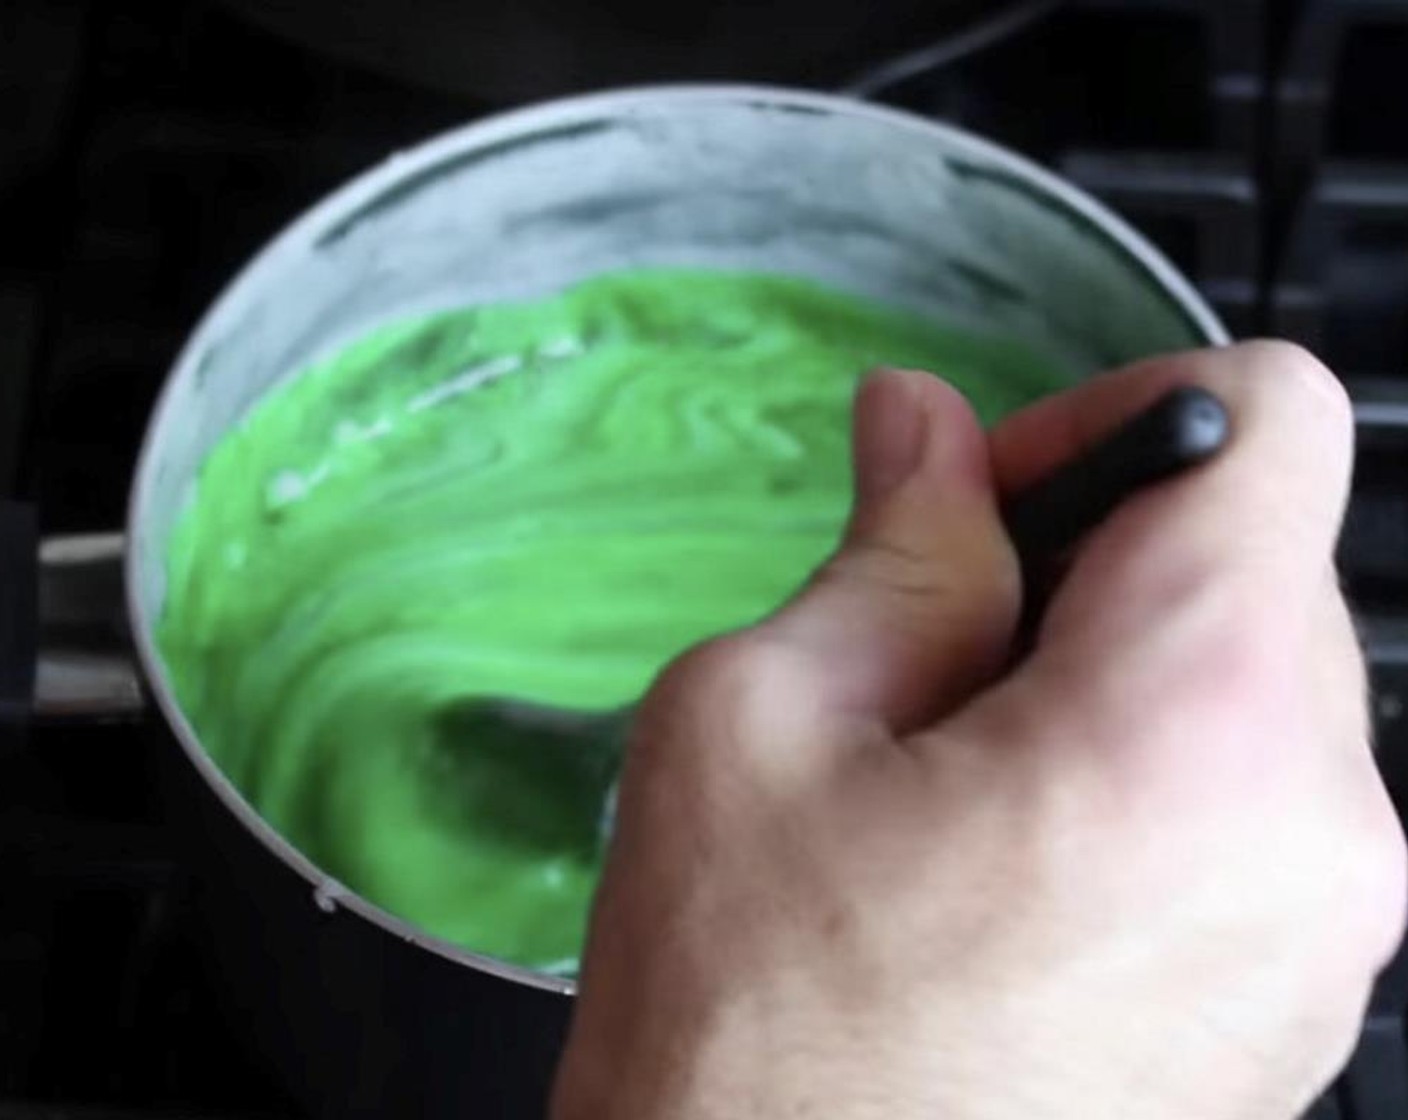 step 8 Add Mint Extract (1 tsp) and mix. Add green Green Food Coloring (1/2 tsp) and mix well.